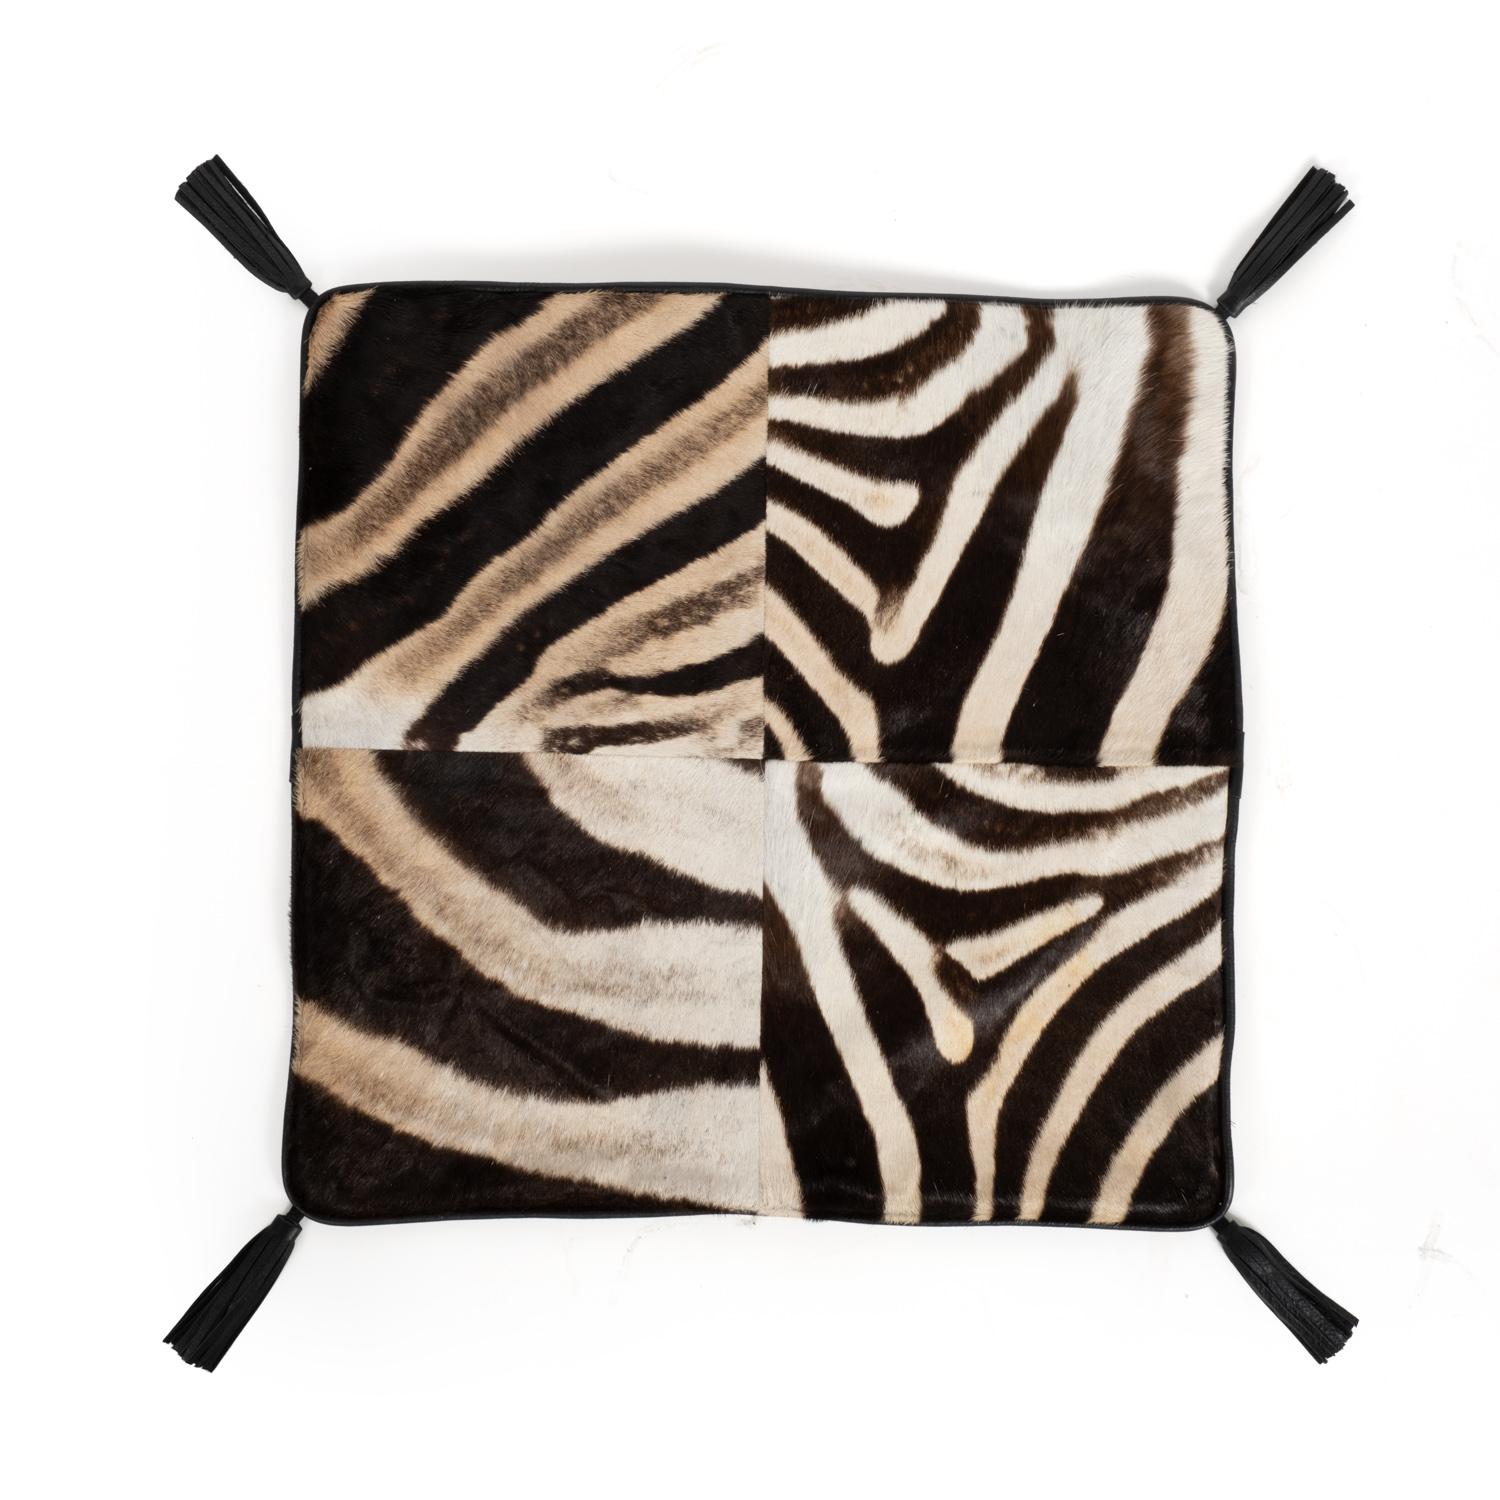 Zebra Leather Bed Pillows - Contemporary - Bedroom